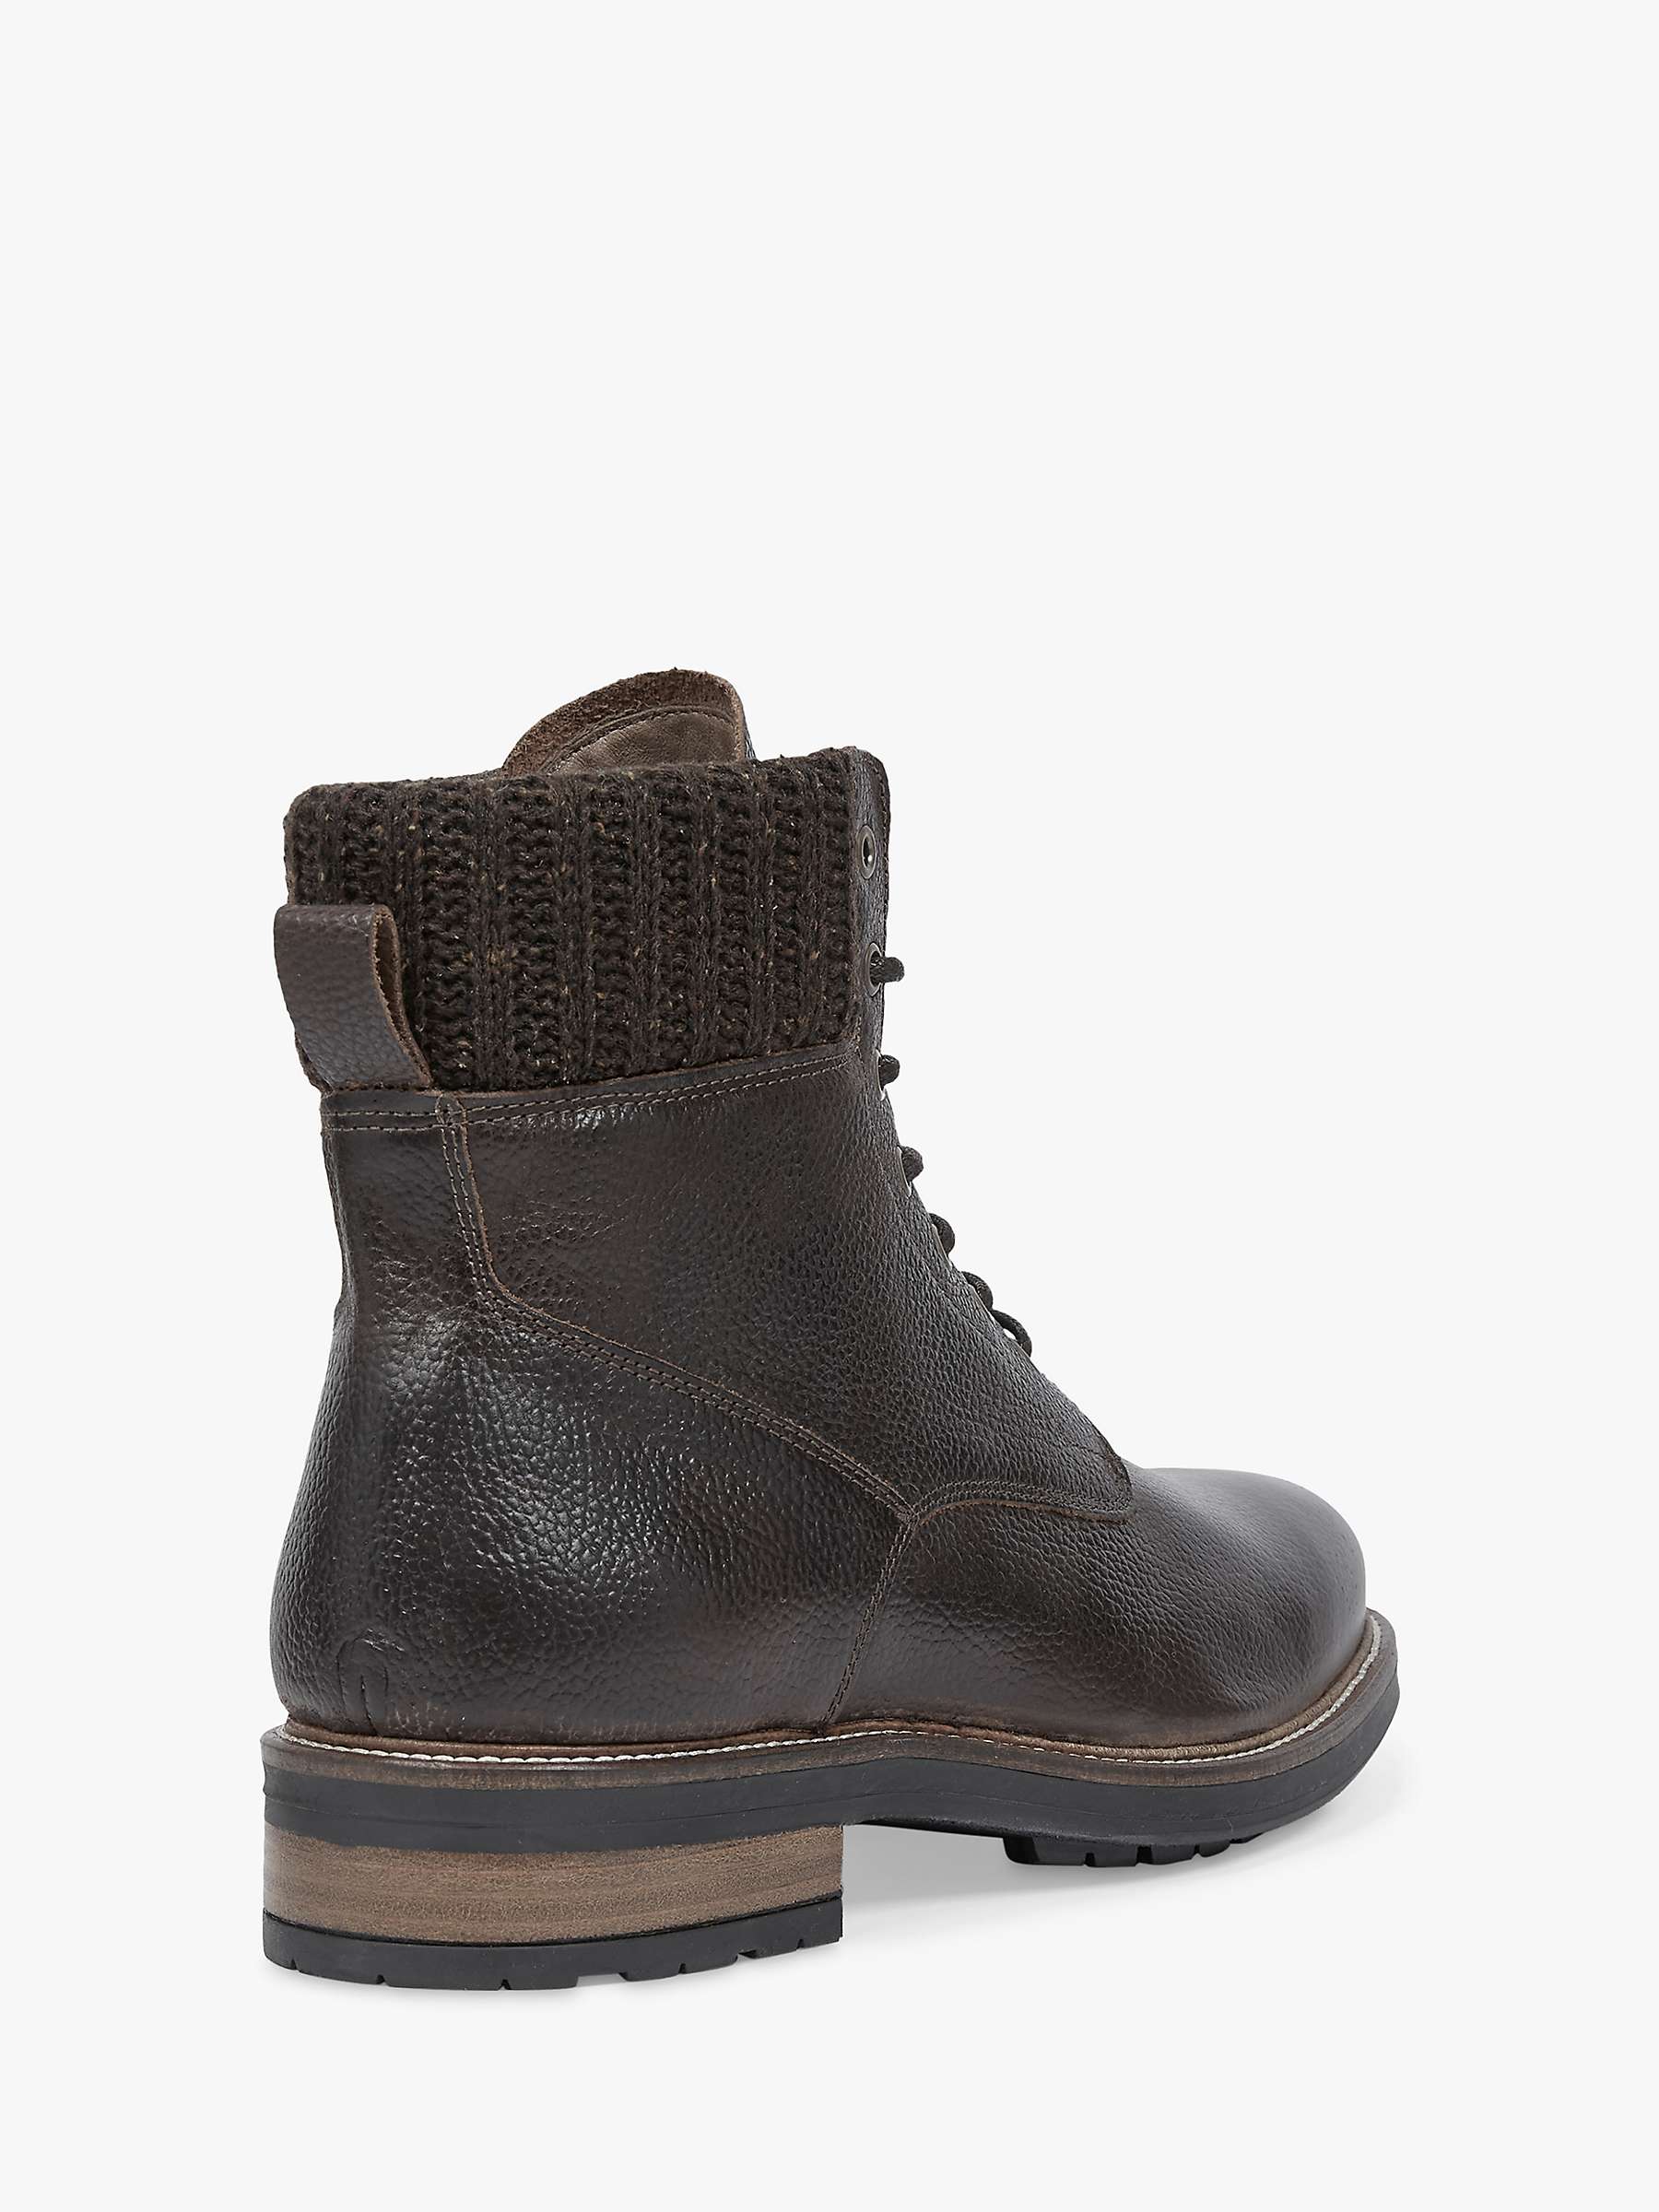 Buy Celtic & Co. Leather Knitted Cuff Ankle Boots Online at johnlewis.com